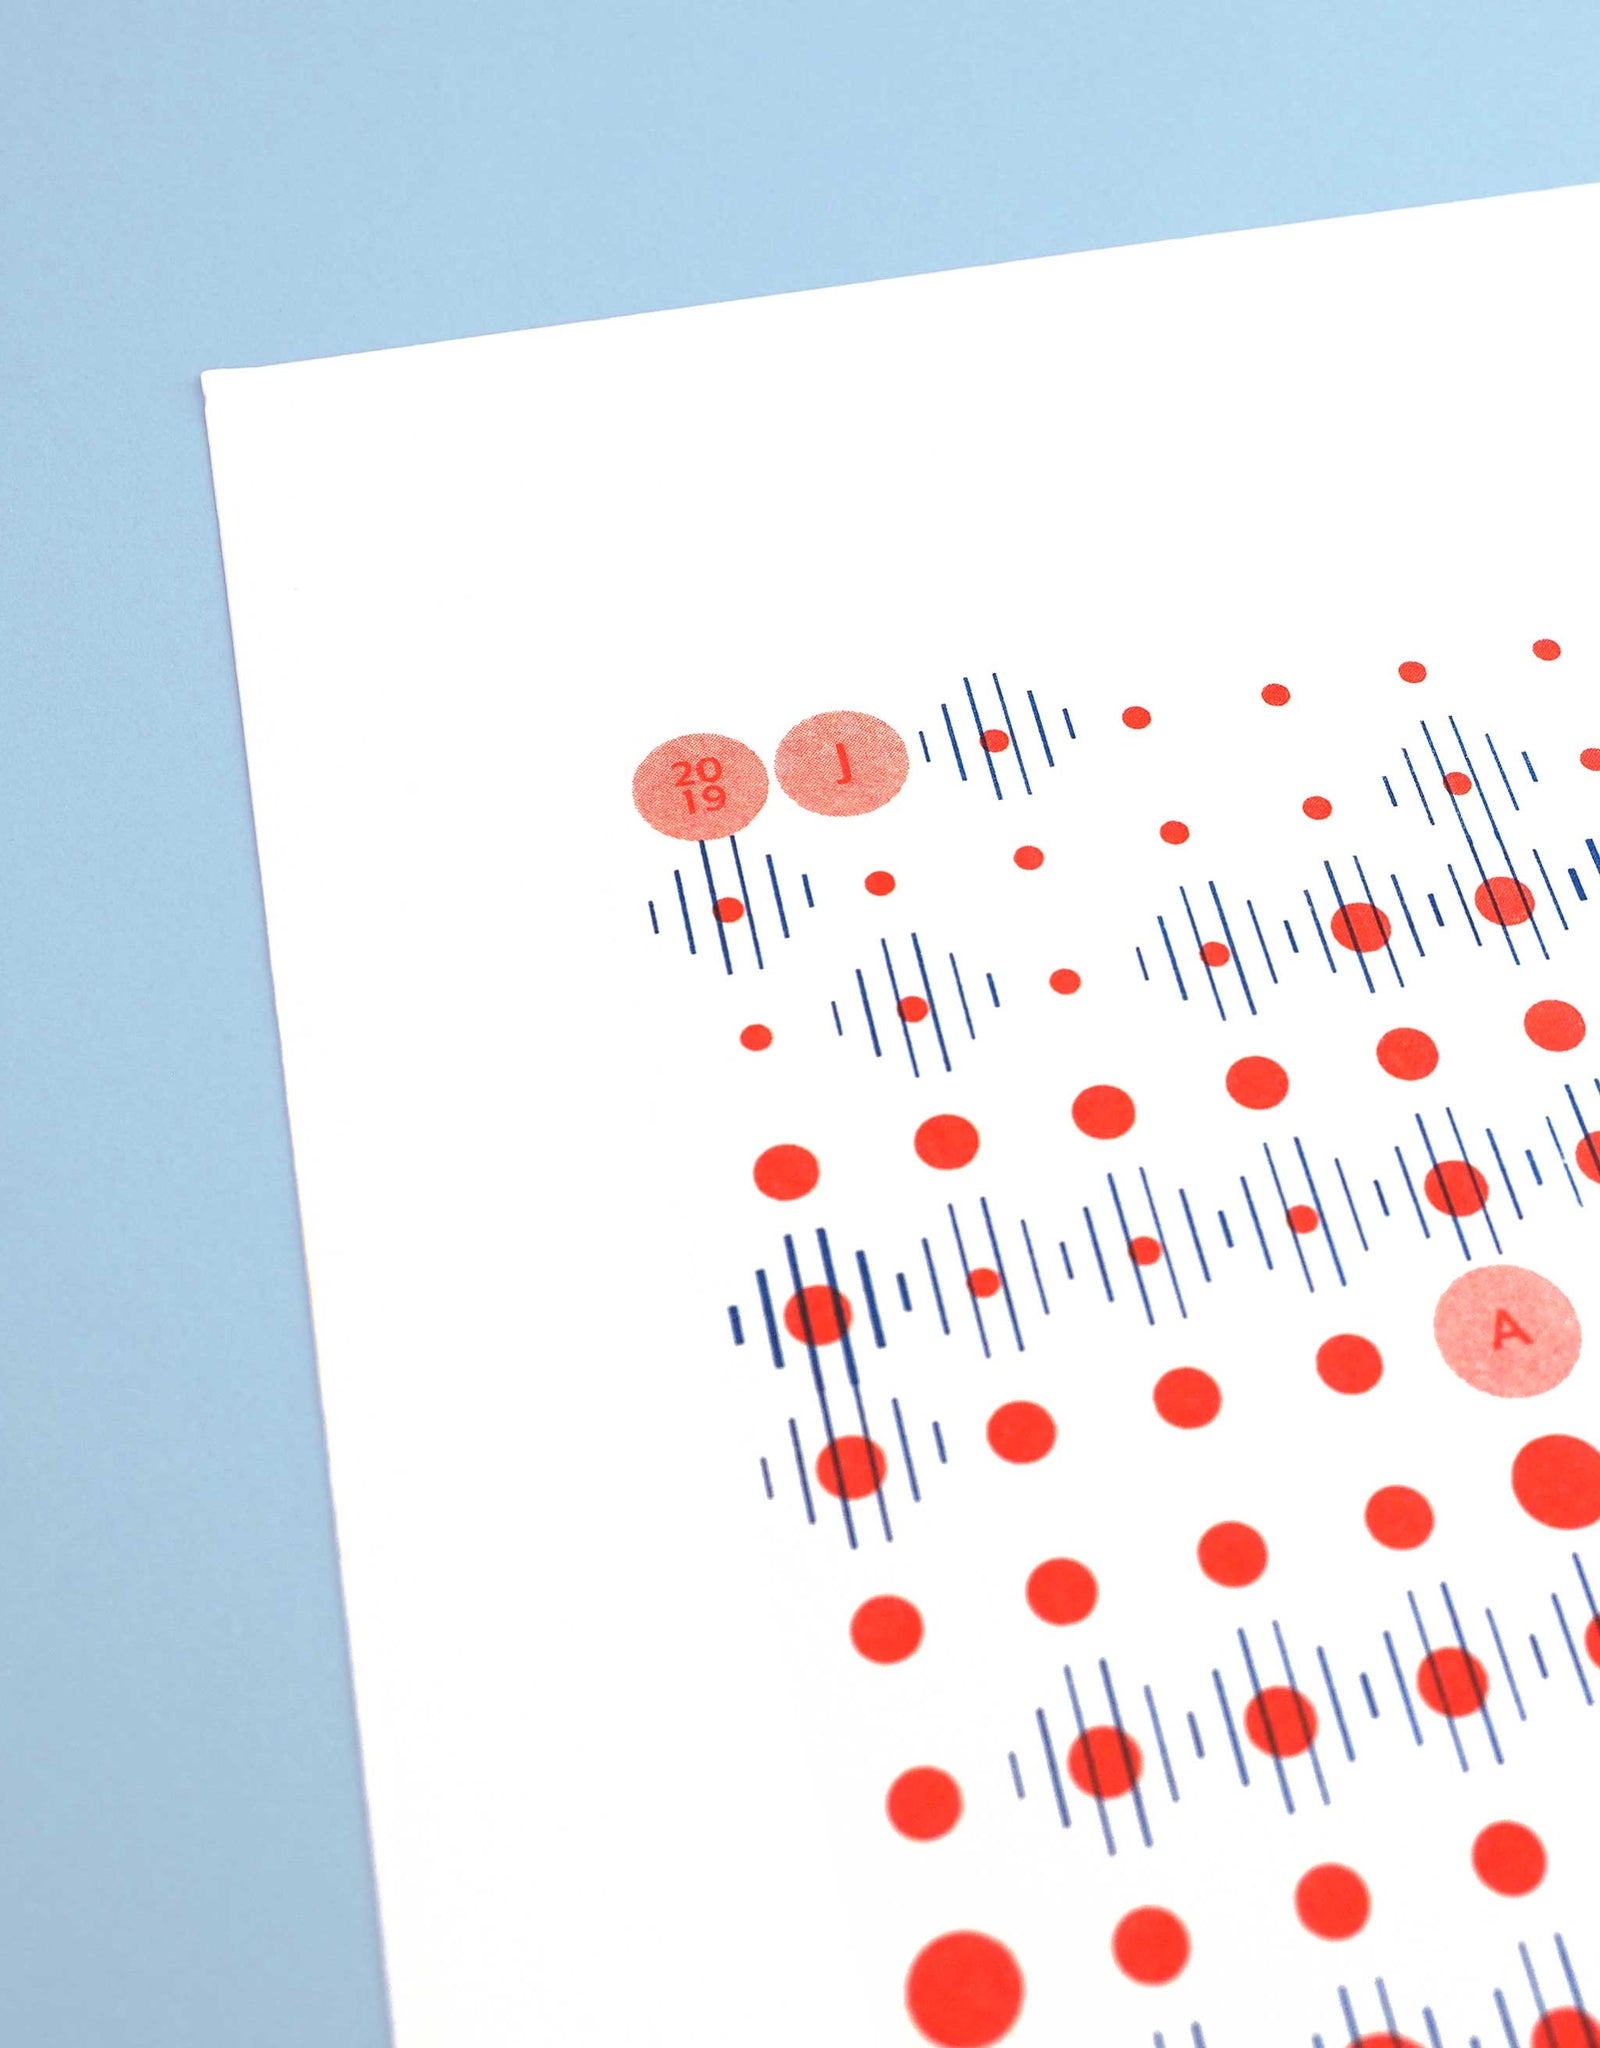 Detail angle of data-visualisation print of Amsterdam weather patterns in blue lines and red dots in grid formation on white paper.